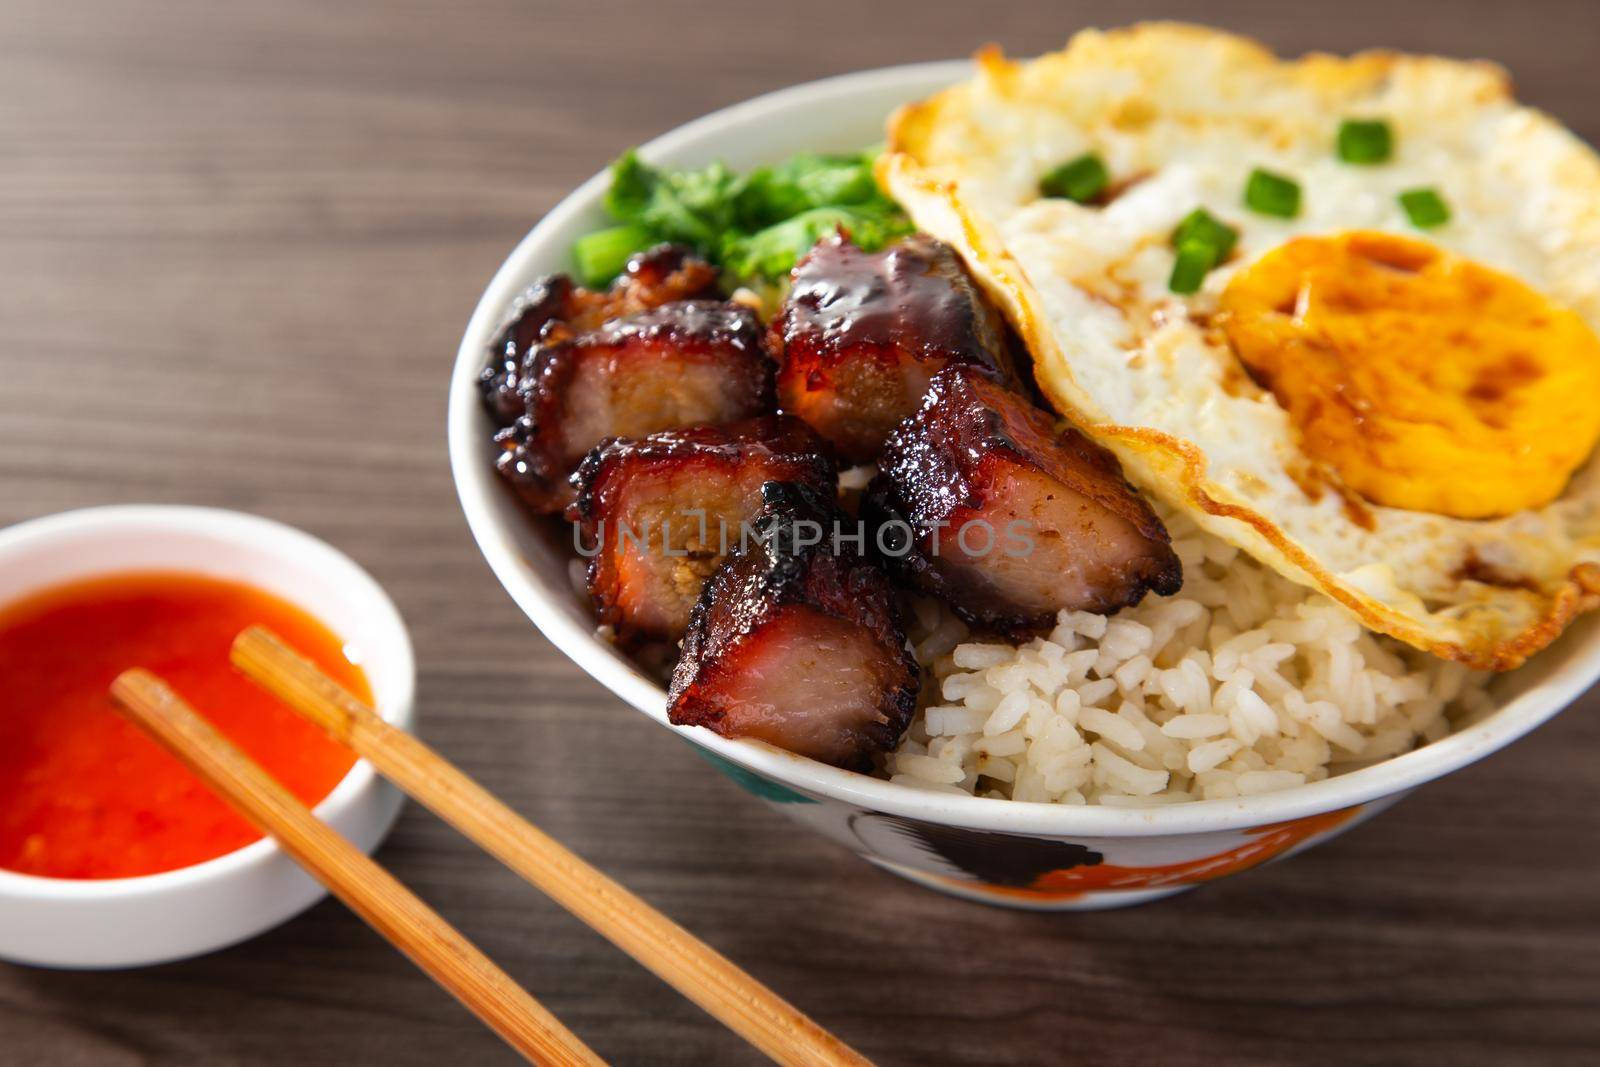 Chinese Sweet Bbq Pork is marinated in a sweet BBQ sauce and served with white rice. by tehcheesiong